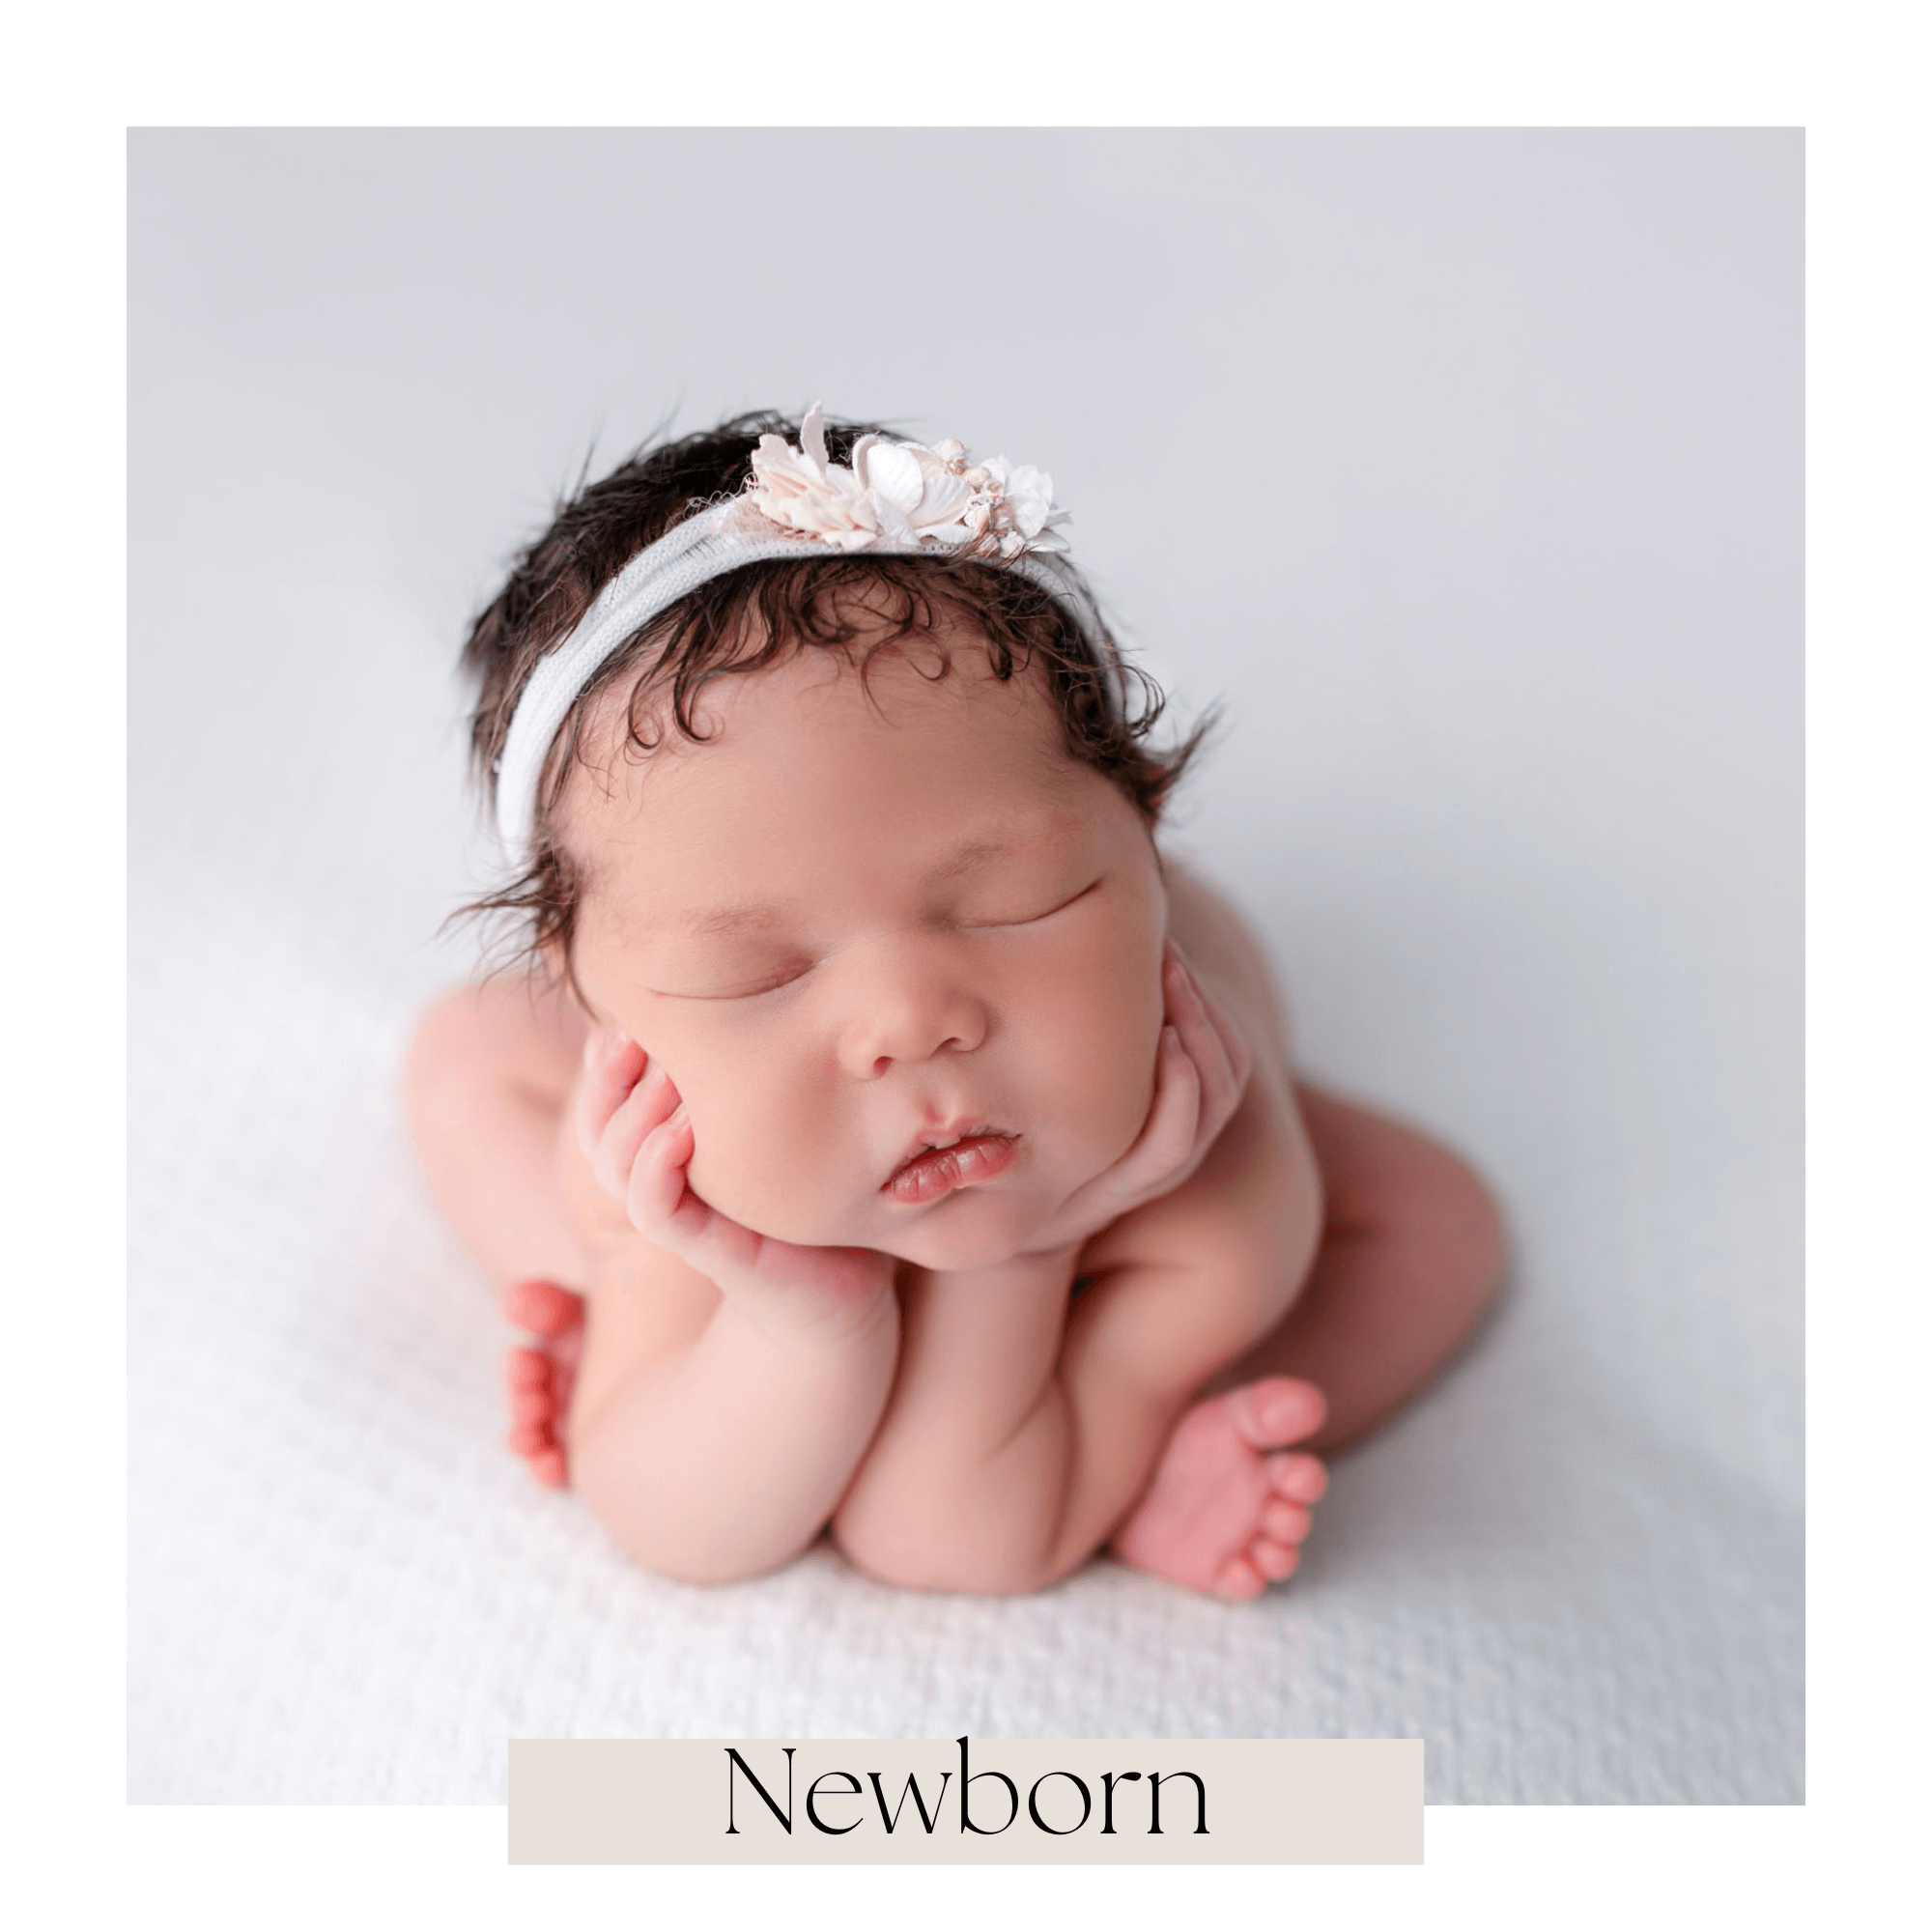 Image thumbnail for Newborn Photography Prices in San Diego